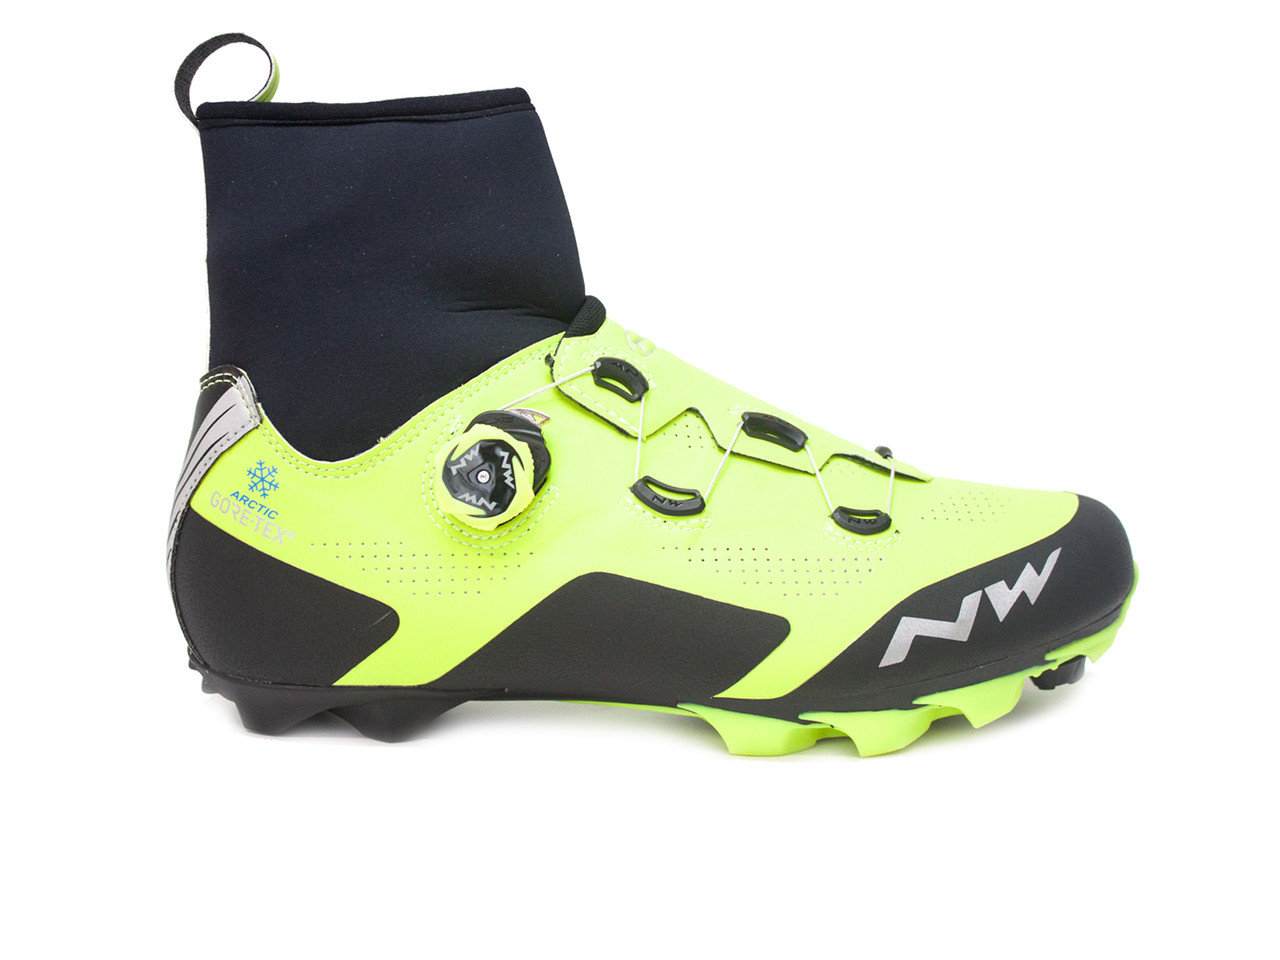 Northwave Raptor Winter Mountain Bike - BikeShoes.com - Free 3 day shipping on orders over $50